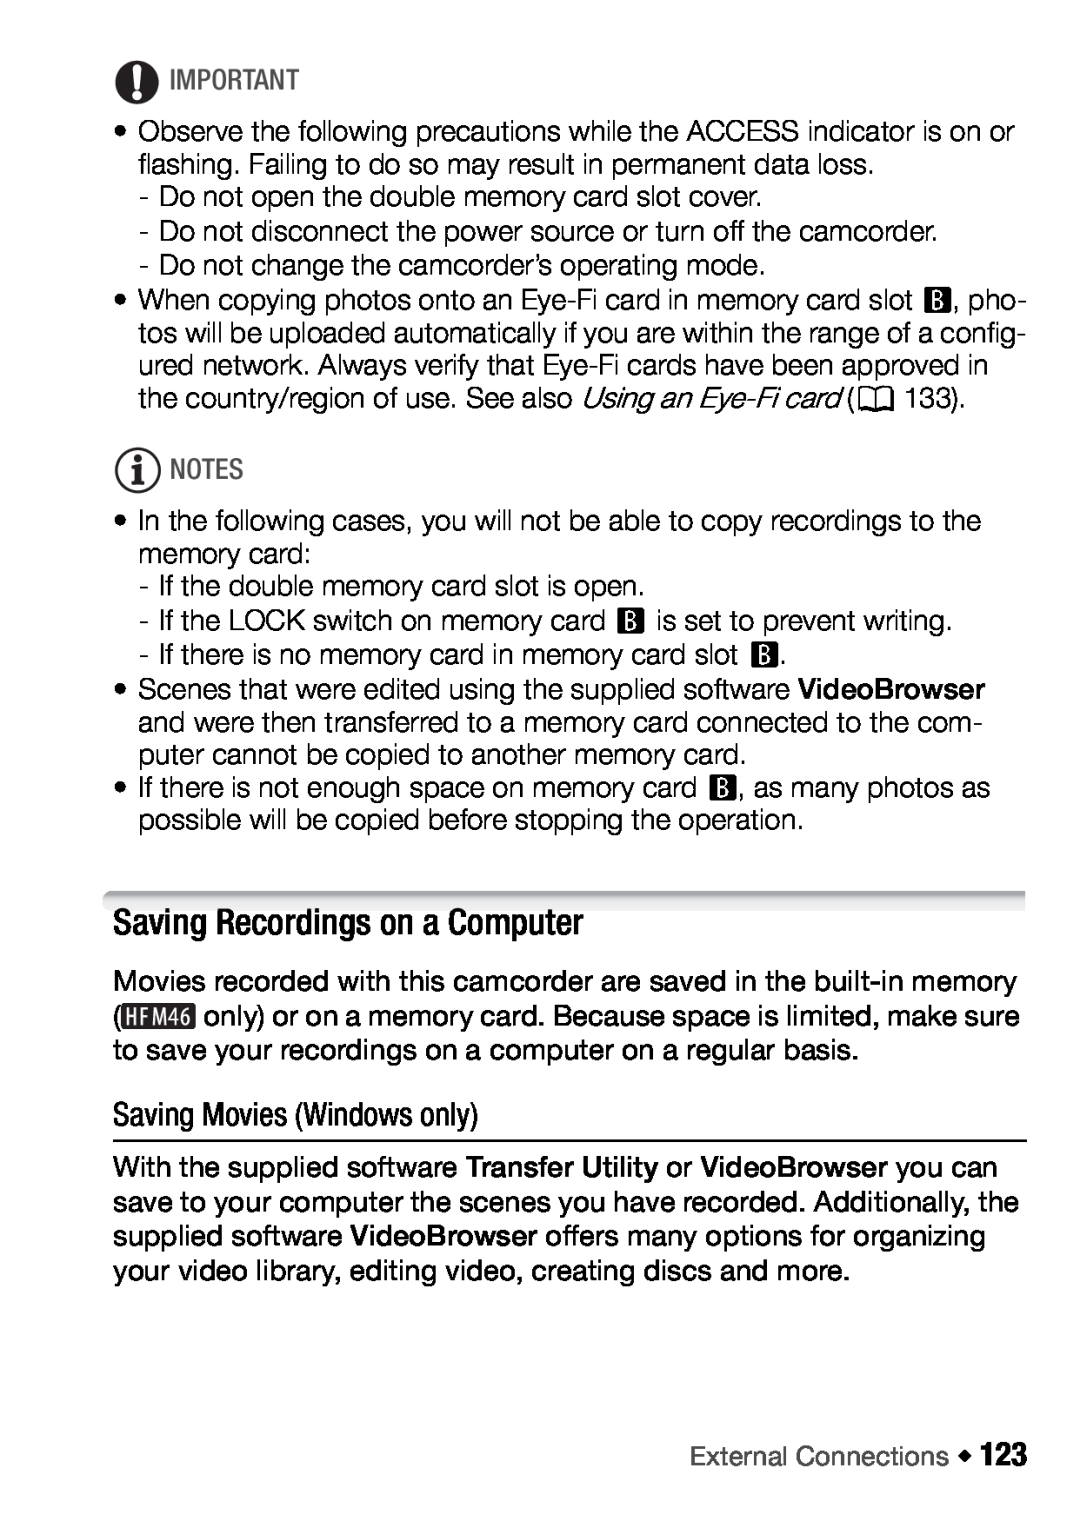 Canon HFM46, HFM406 instruction manual Saving Recordings on a Computer, Saving Movies Windows only 